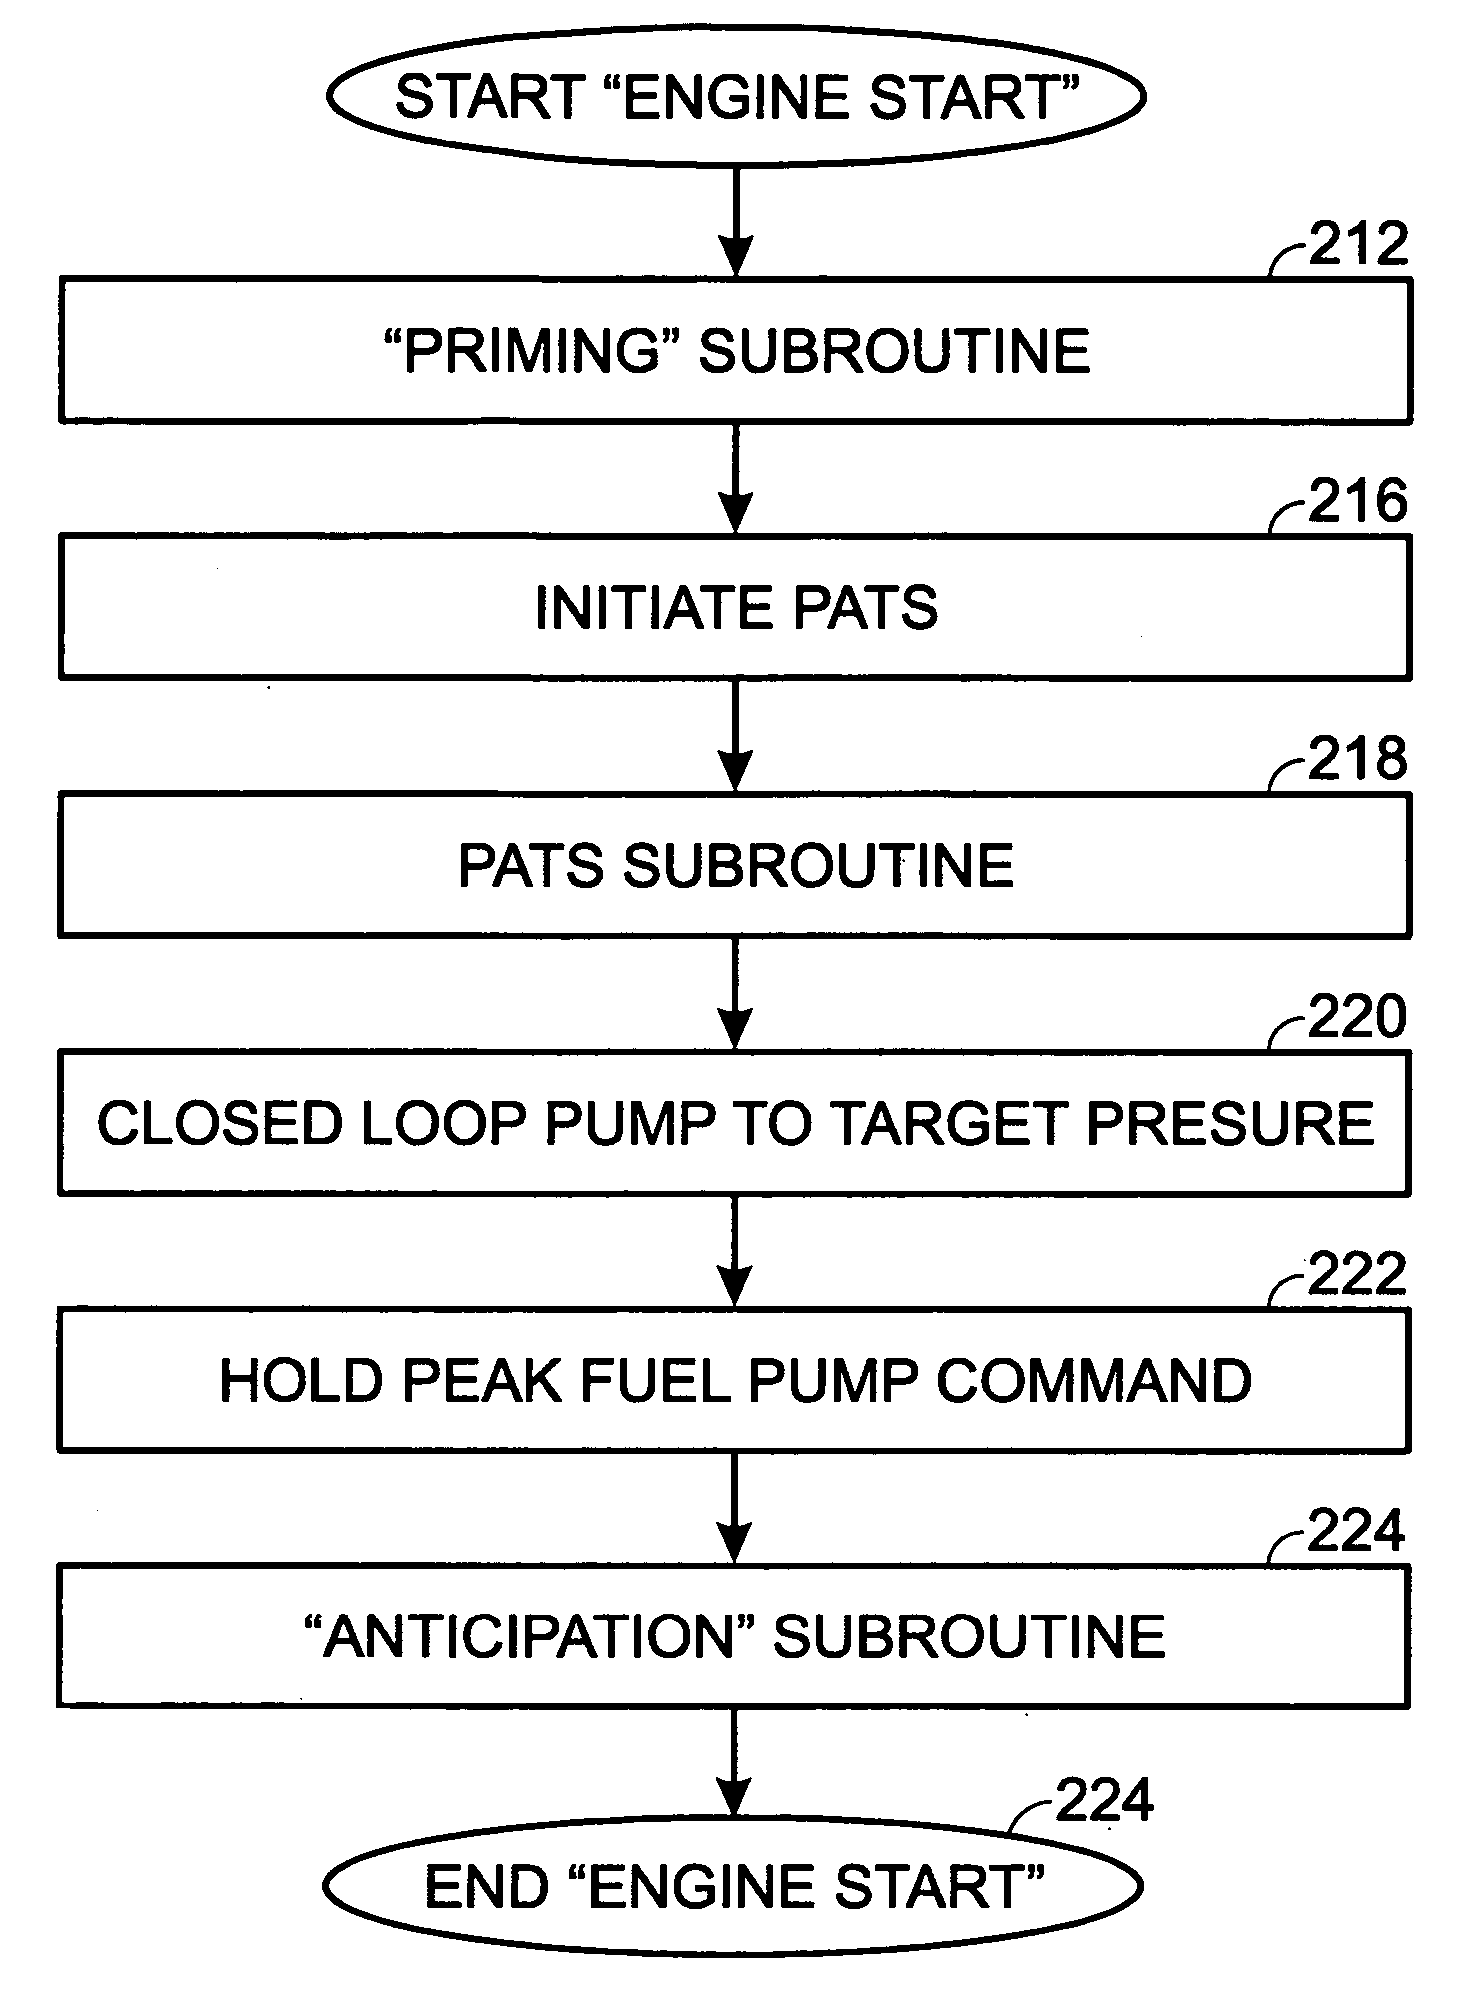 System and method to prime an electronic returnless fuel system during an engine start